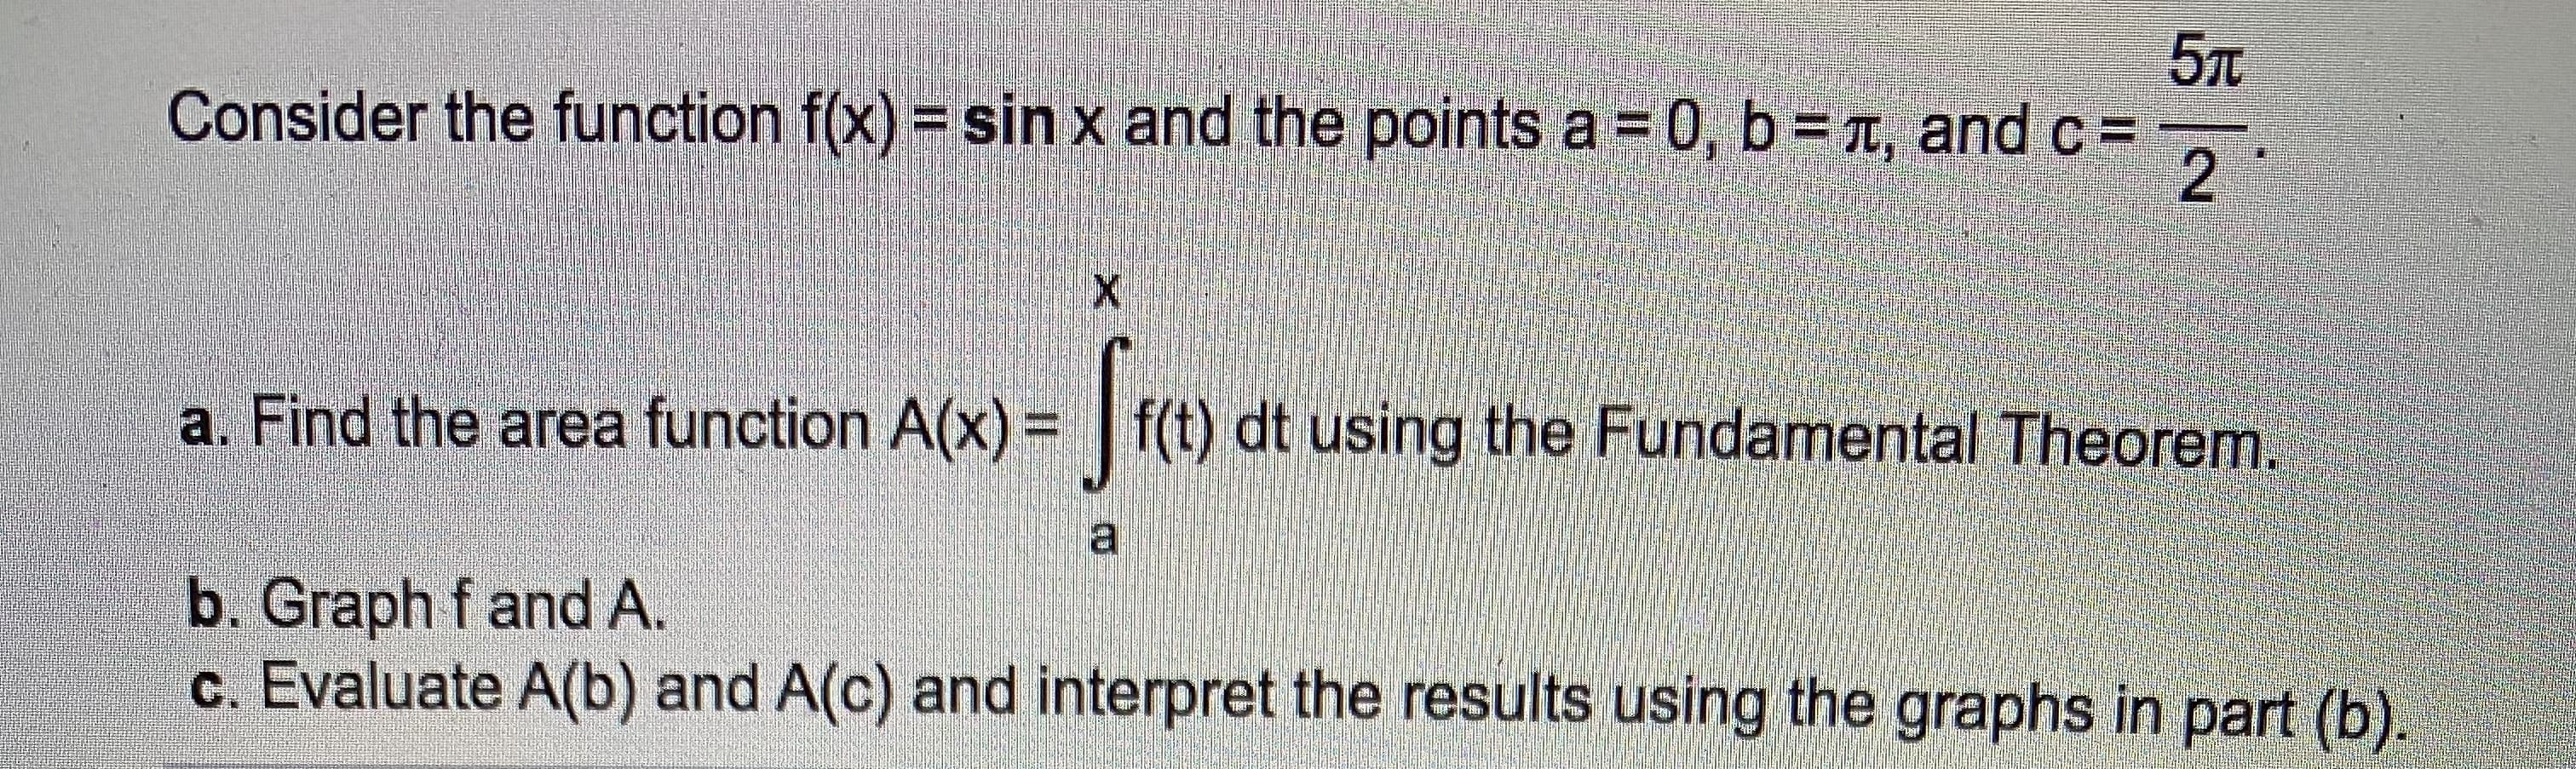 5л
Consider the function f(x) = sin x and the points a = 0, b =T, and c =
2.
a. Find the area function A(x) = | f(t) dt using the Fundamental Theorem.
b. Graph f and A.
c. Evaluate A(b) and A(c) and interpret the results using the graphs in part (b).
